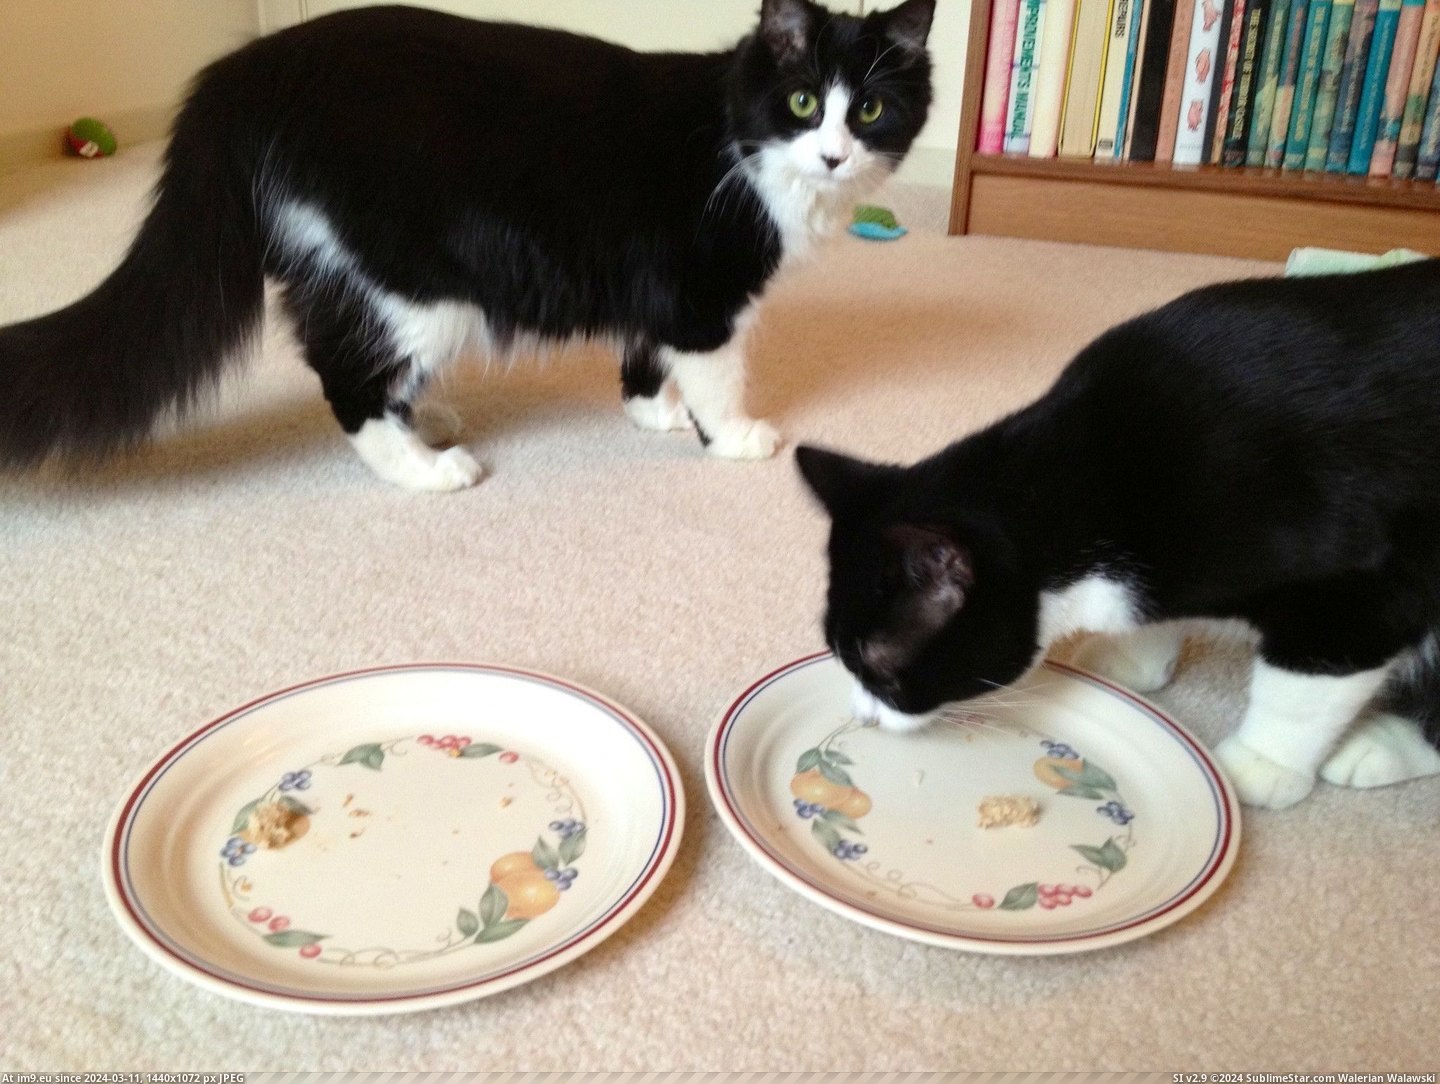 #Cats #Two #Happy #Feast #Catsgiving #Enjoying #Thanksgiving #Kitties [Cats] Just two kitties enjoying a Catsgiving feast. Happy Thanksgiving everyone! 2 Pic. (Image of album My r/CATS favs))